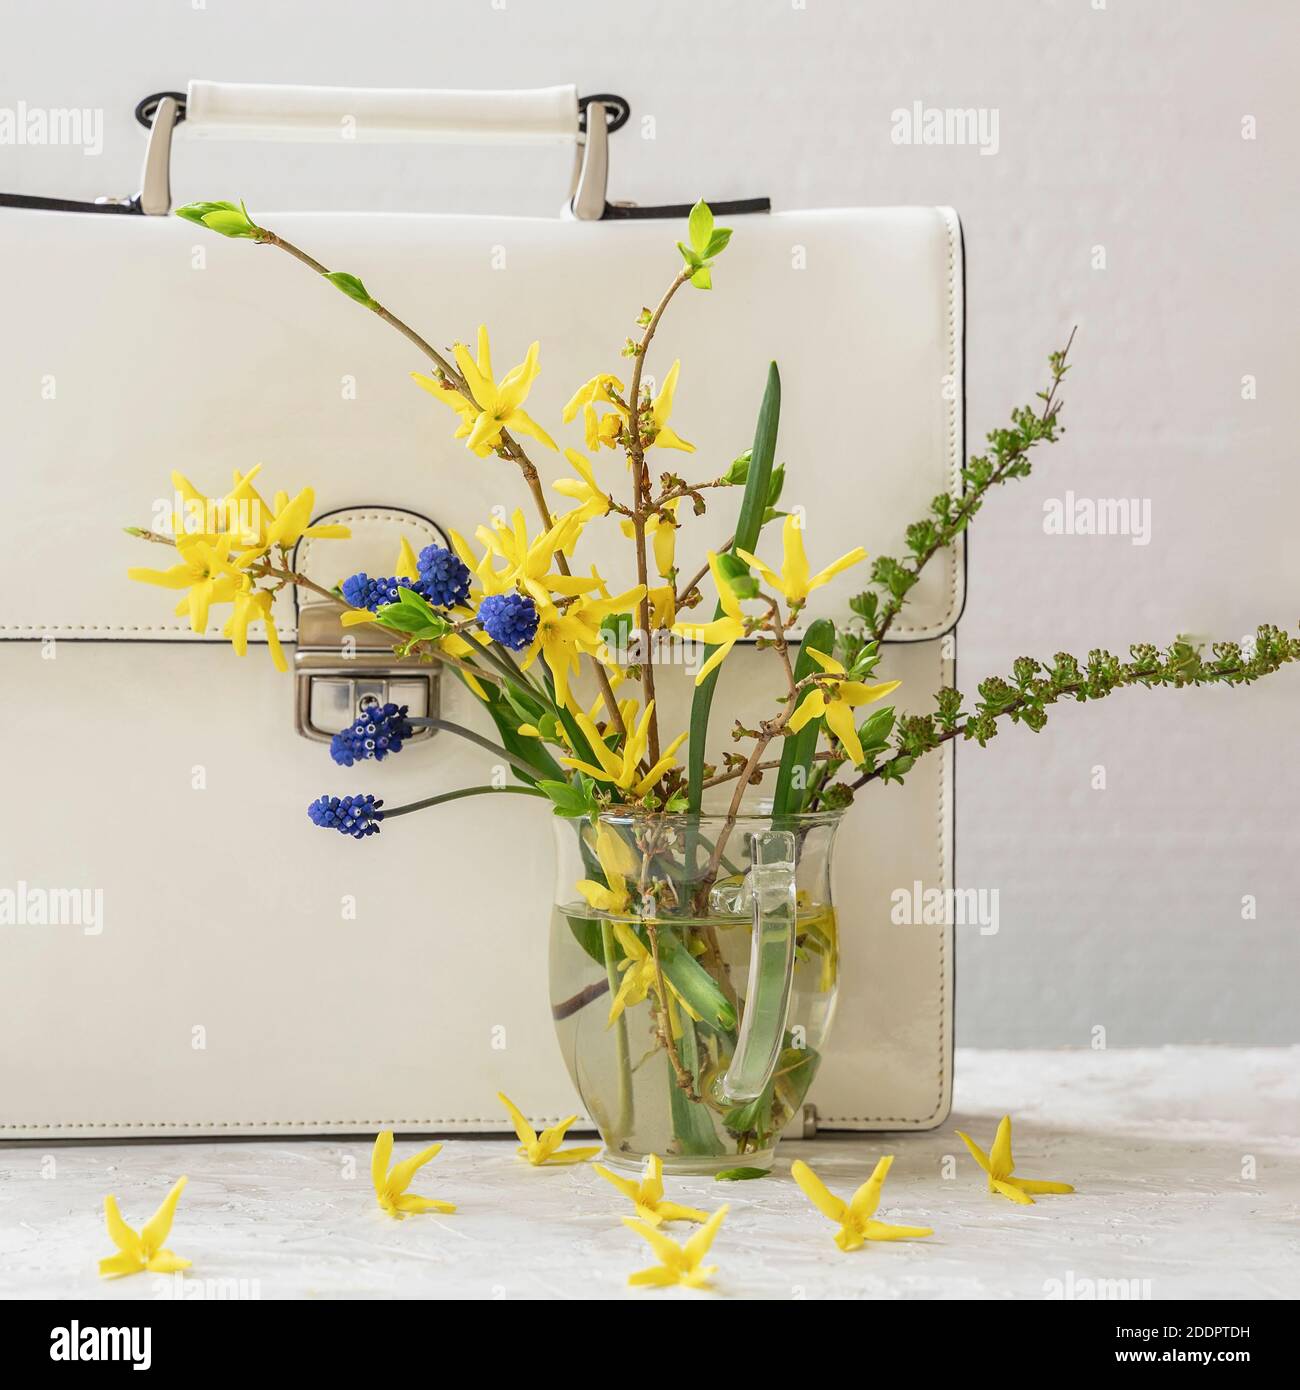 Bouquet of wild colorful flowers in glass vase and white briefcase, close-up. Concept of spring stilelife, seasonal shopping Stock Photo